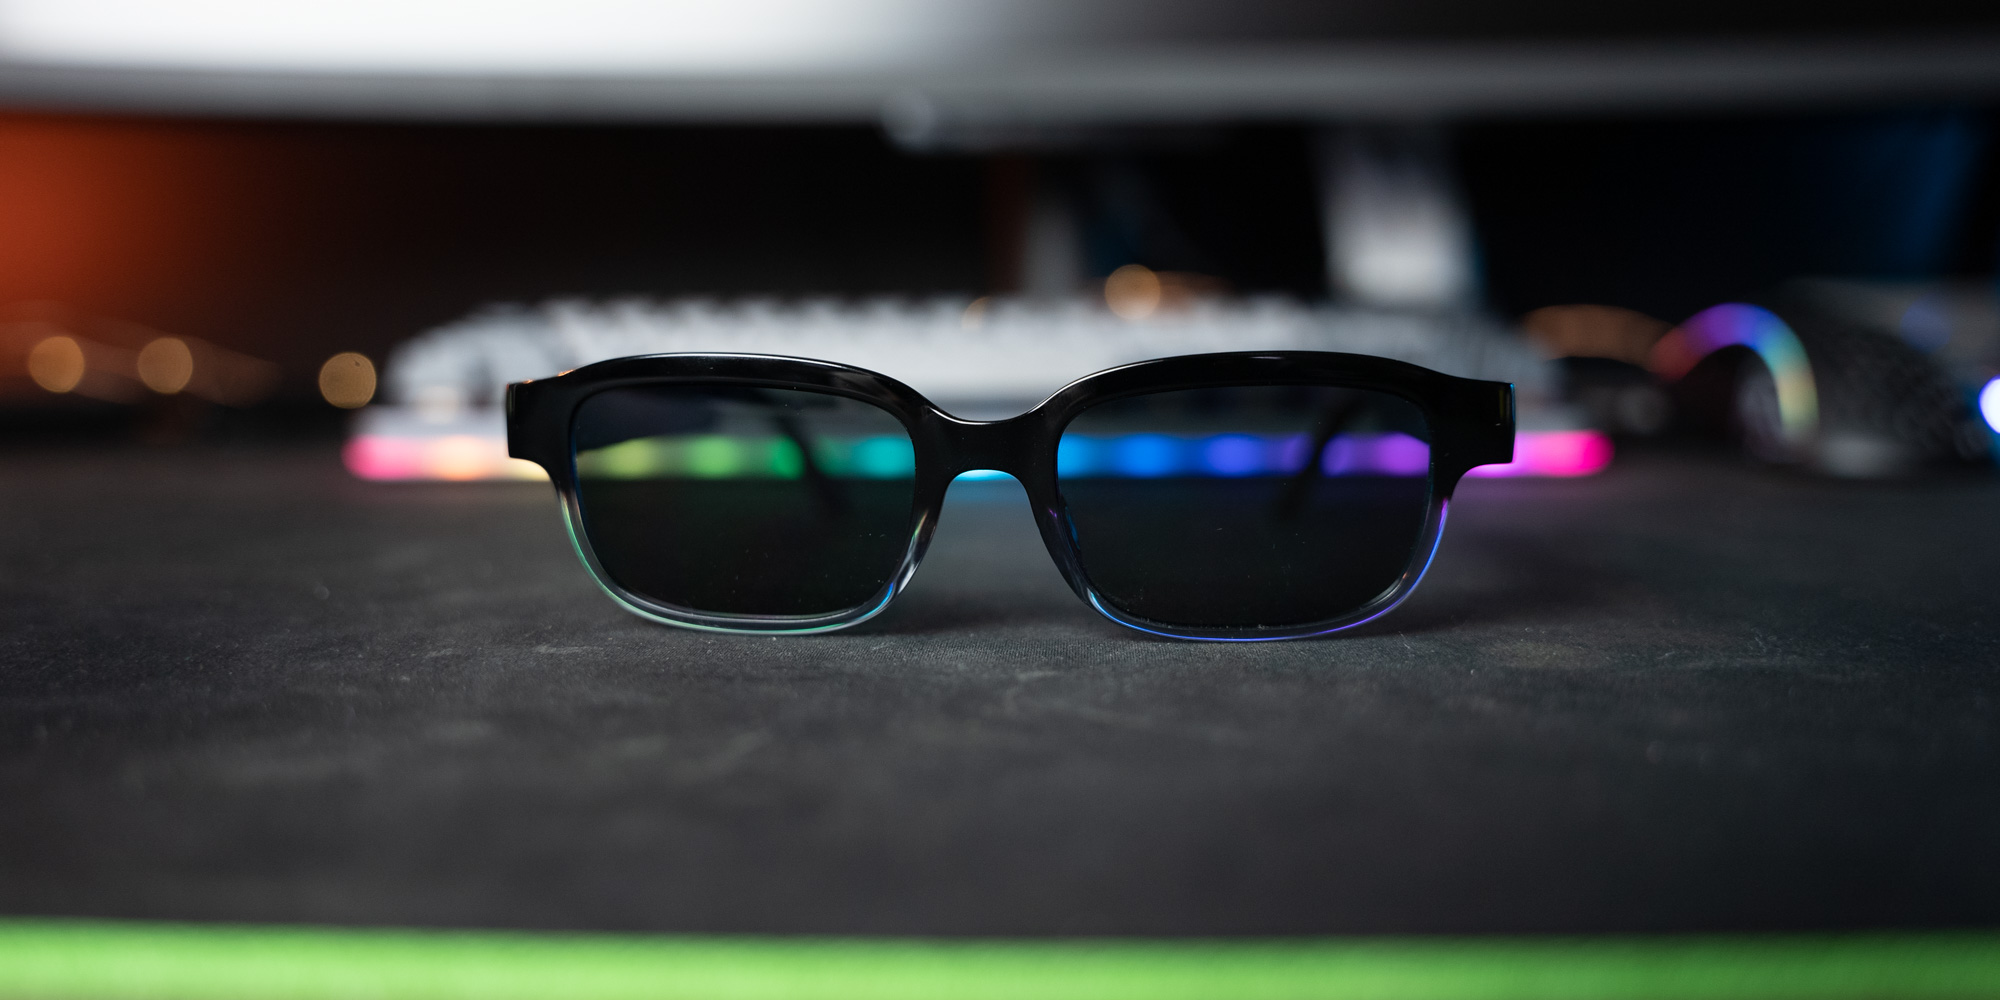 Echo Frames Review: more colors, lens options, and features